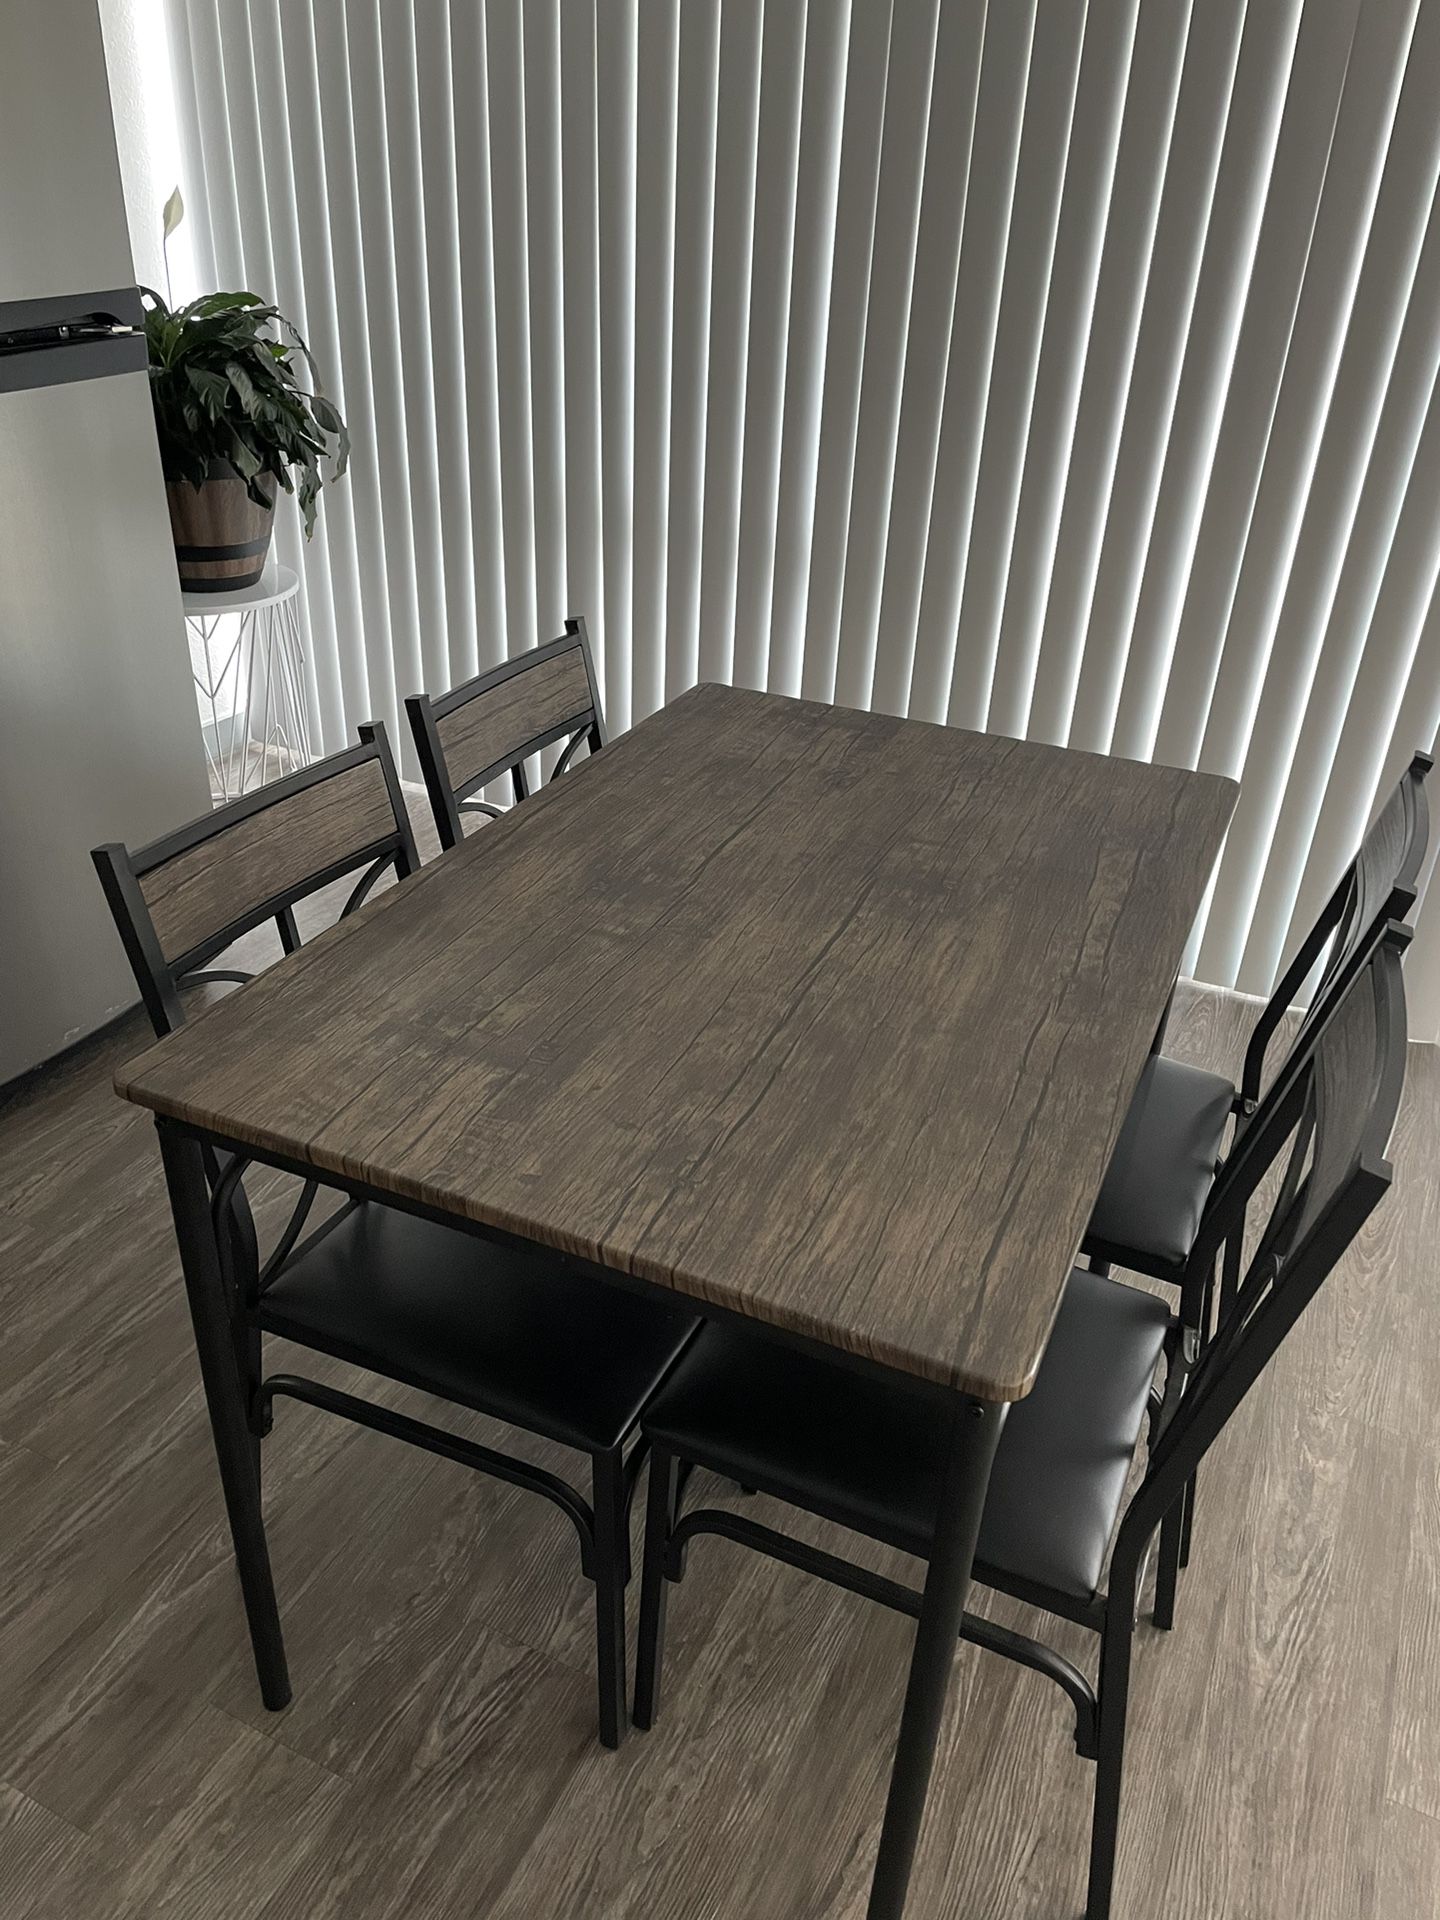 New IKEA Kitchen Table With Chairs ! 